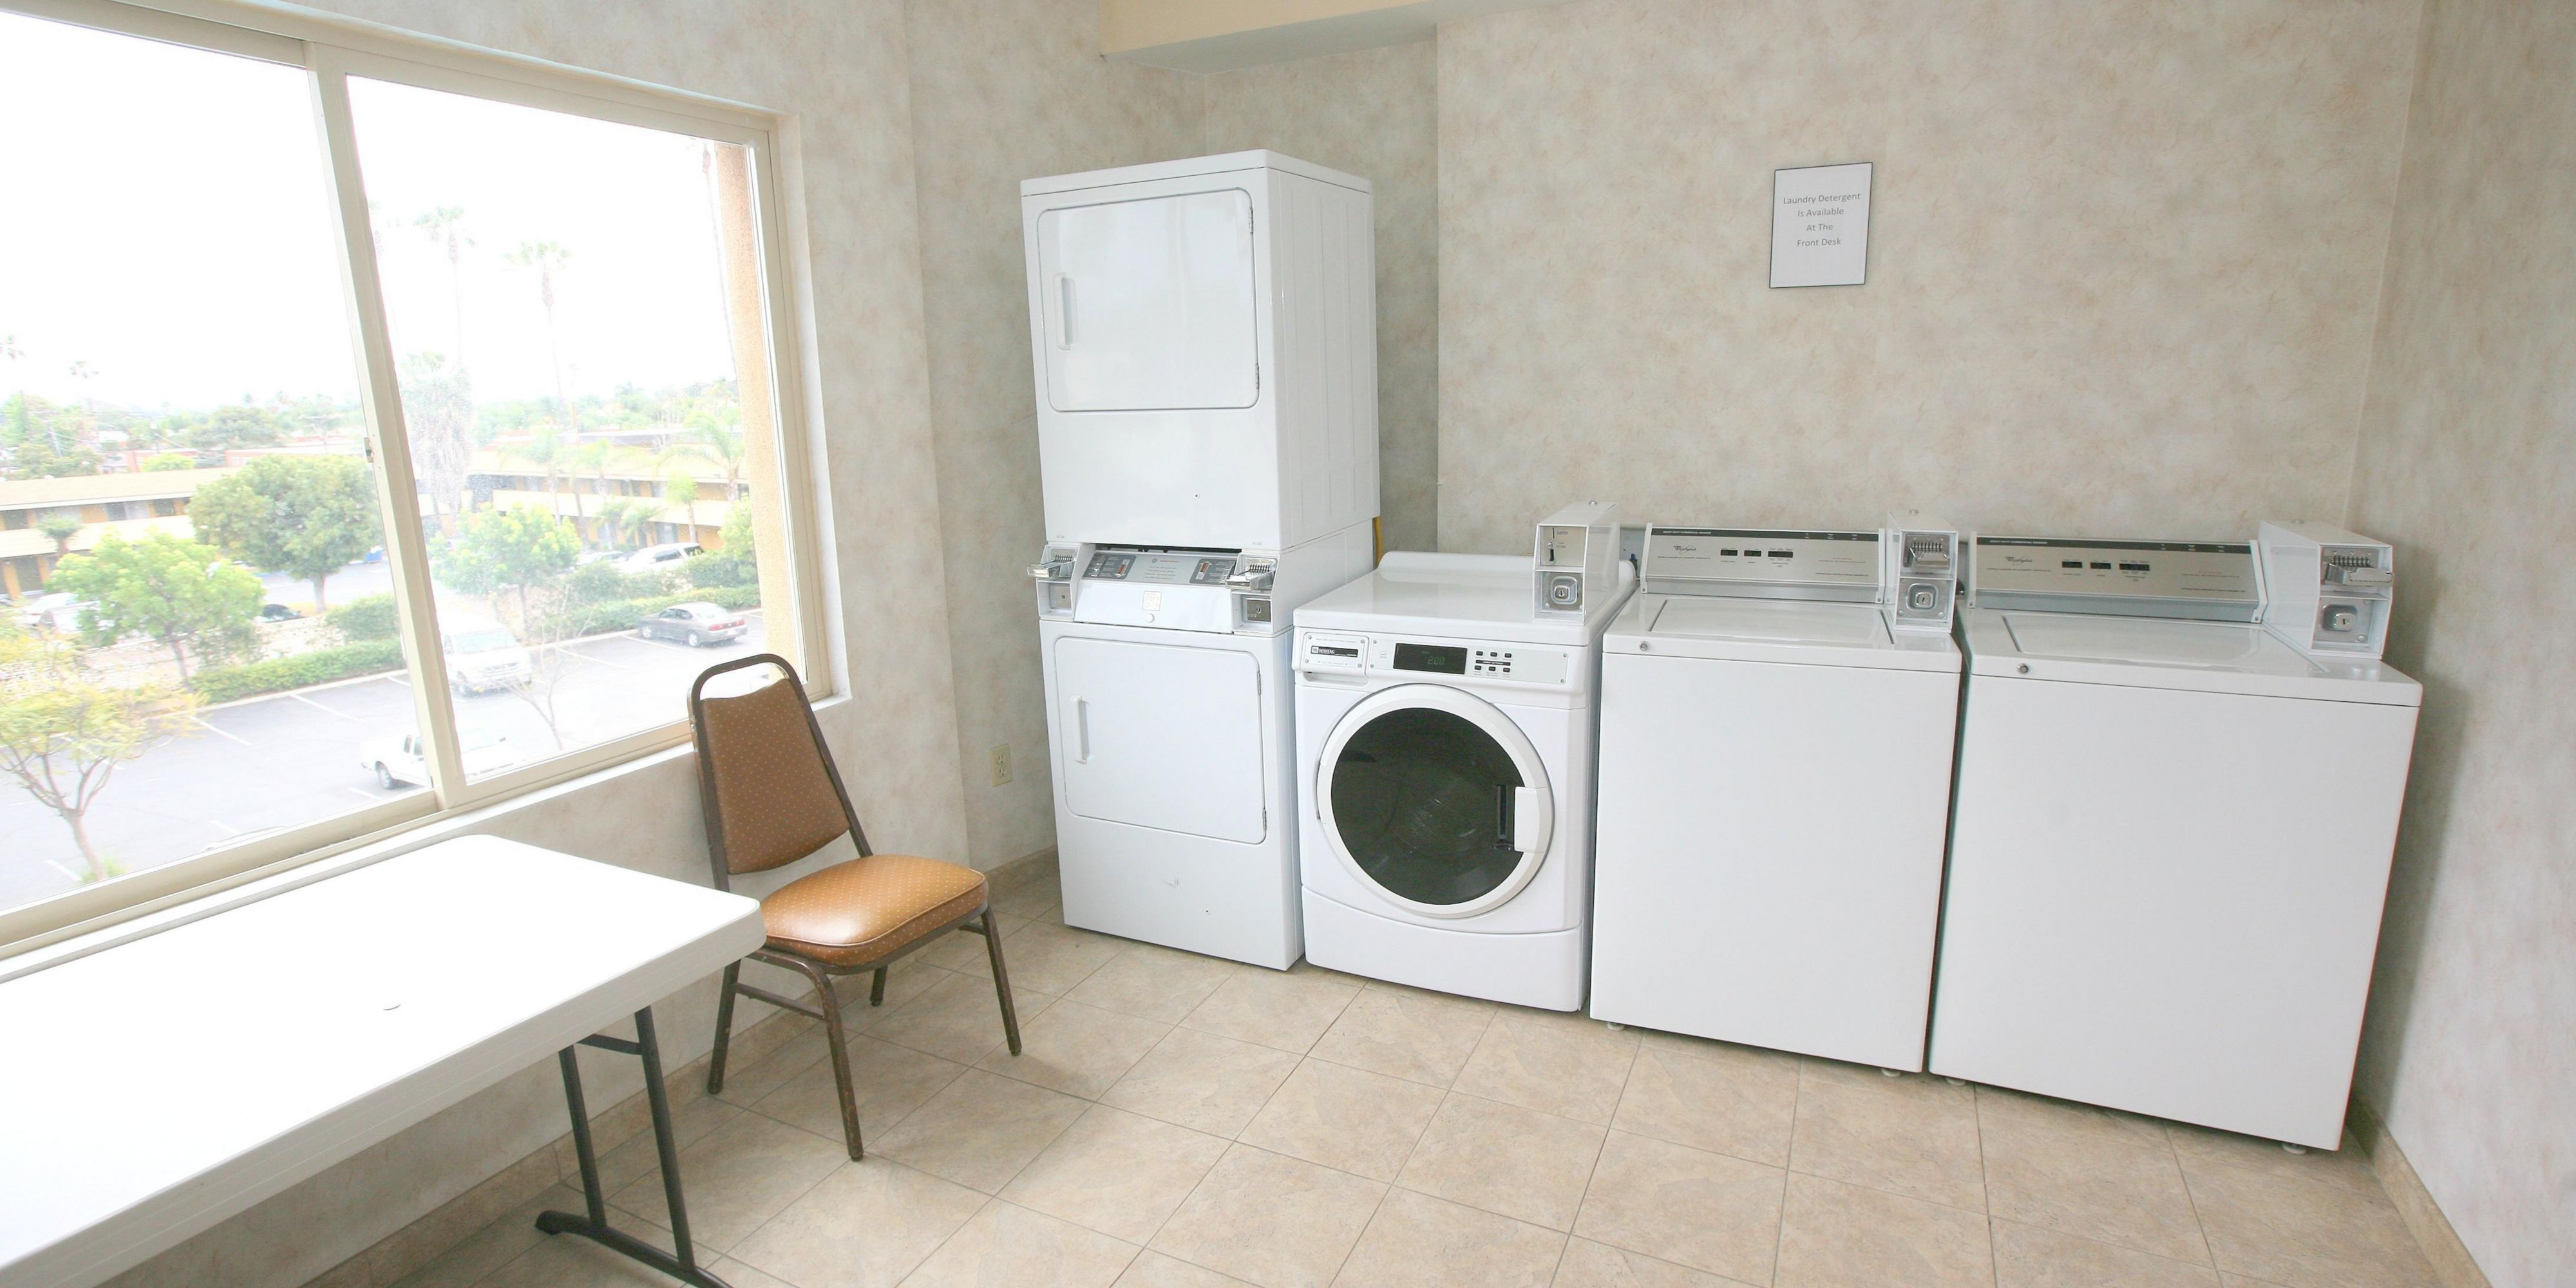 The Holiday Inn Express San Diego South - Chula Vista offers self-service, coin operated, guest laundry.